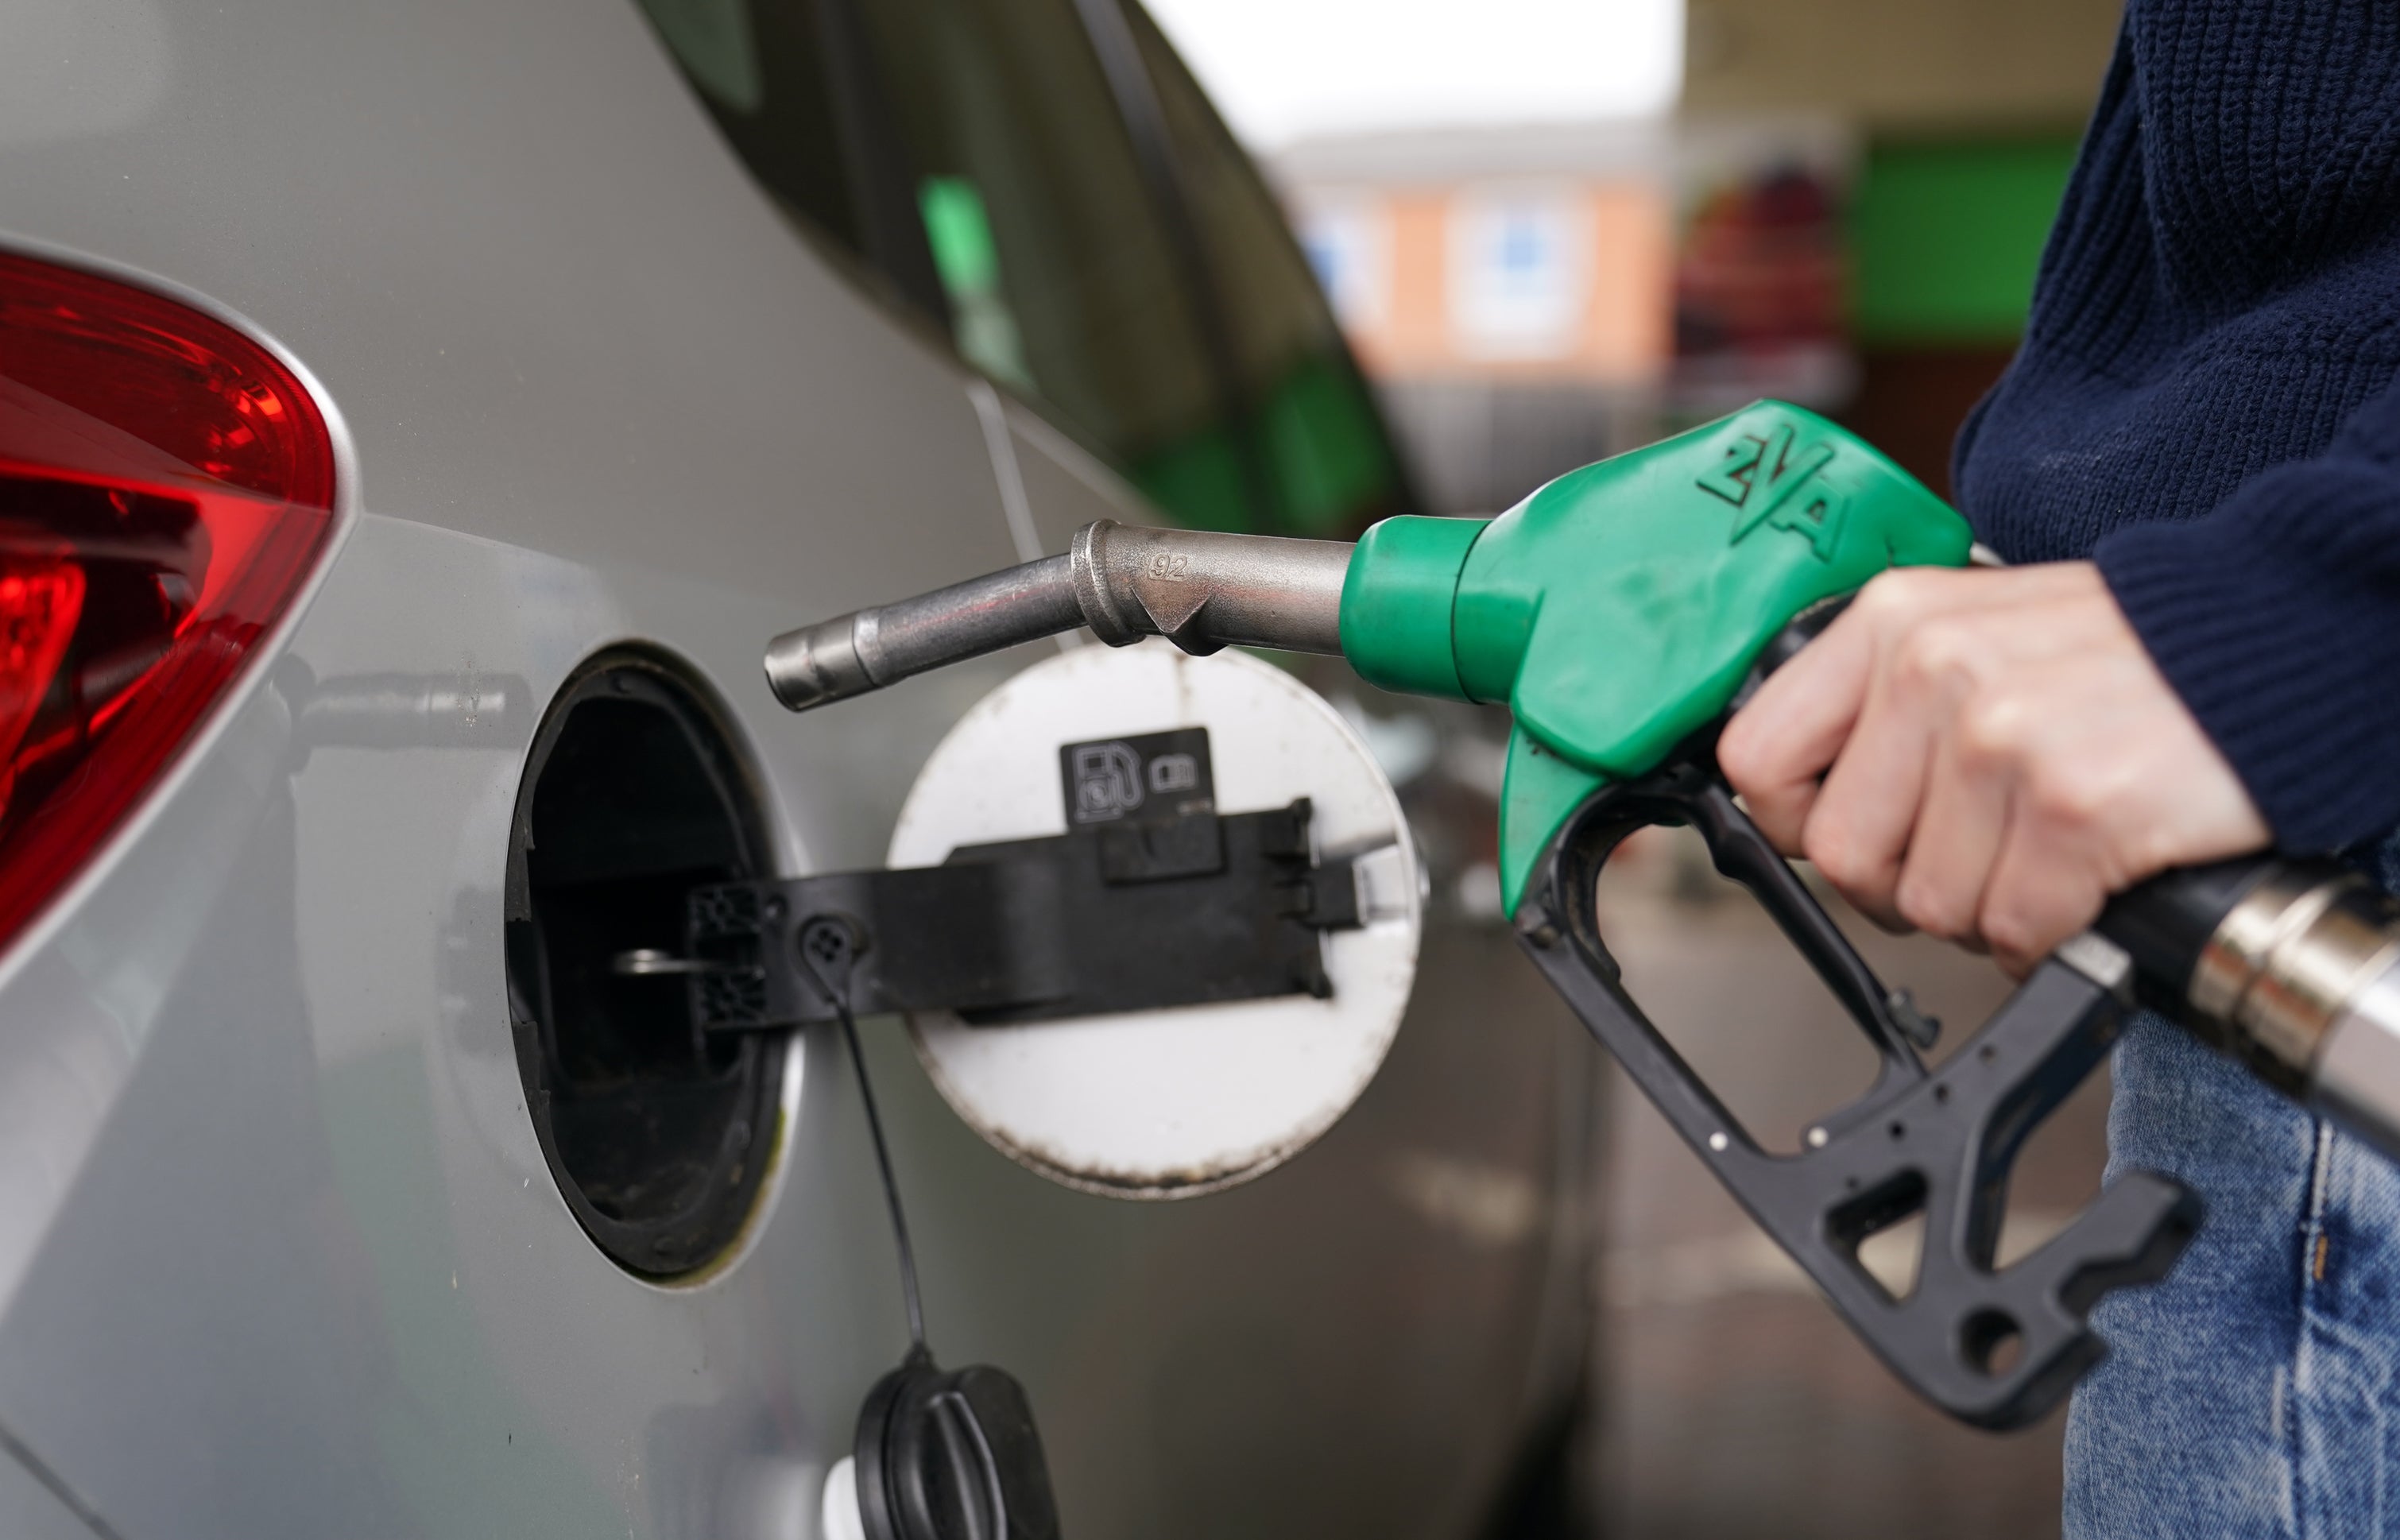 RAC is calling on Chancellor Rishi Sunak to step in and cut VAT rates amidst rising petrol prices. (Joe Giddens/PA)